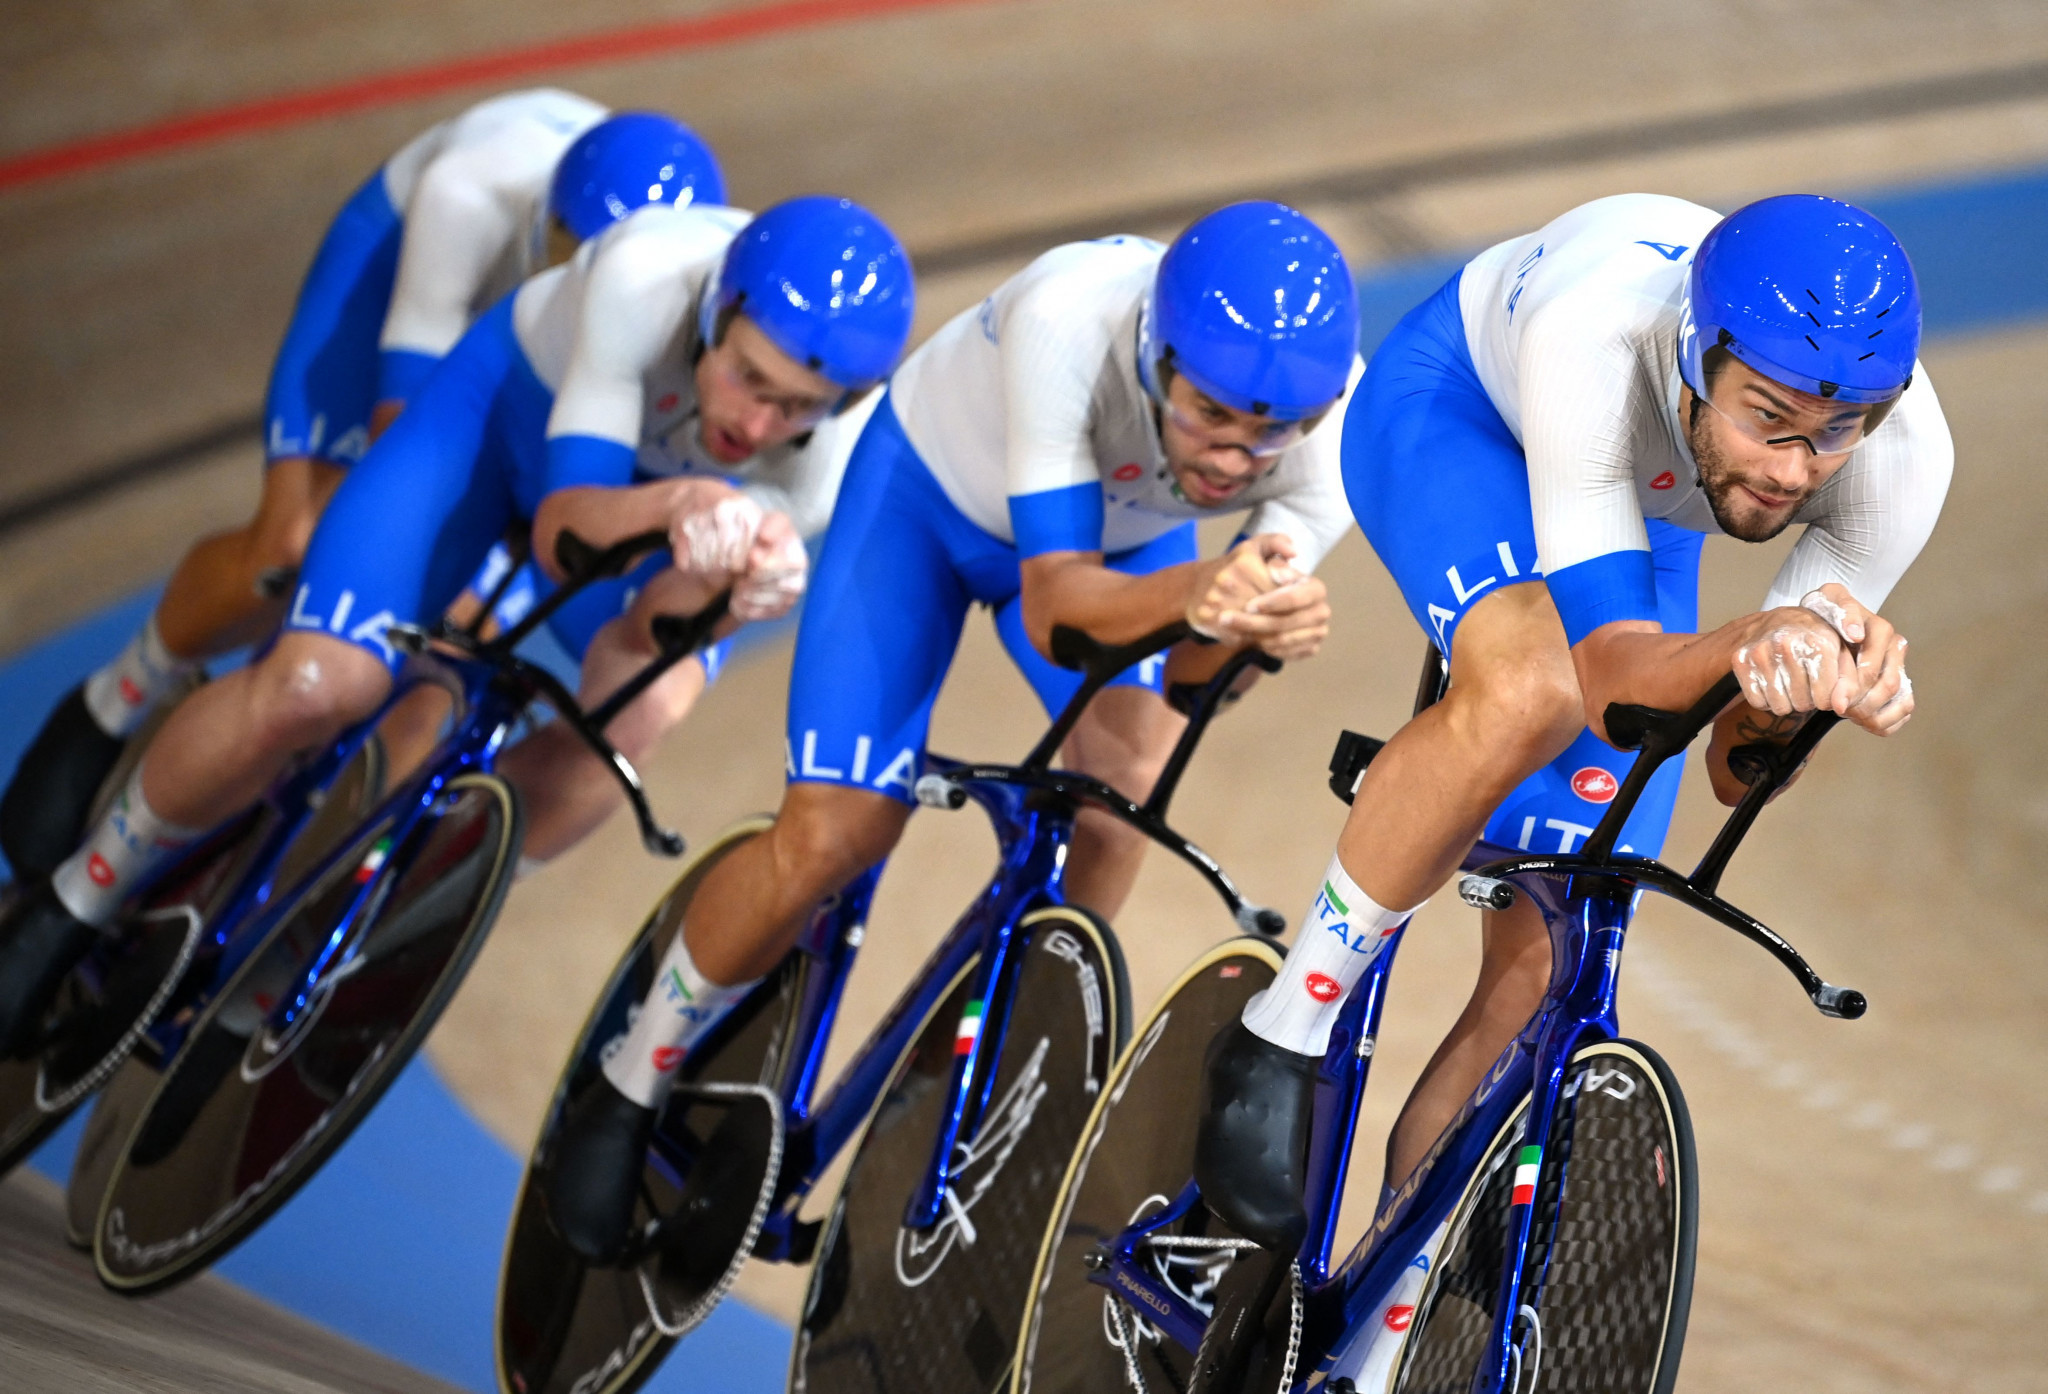 And another world record fell in the men’s team pursuit final, with Italy emerging victorious ©Getty Images